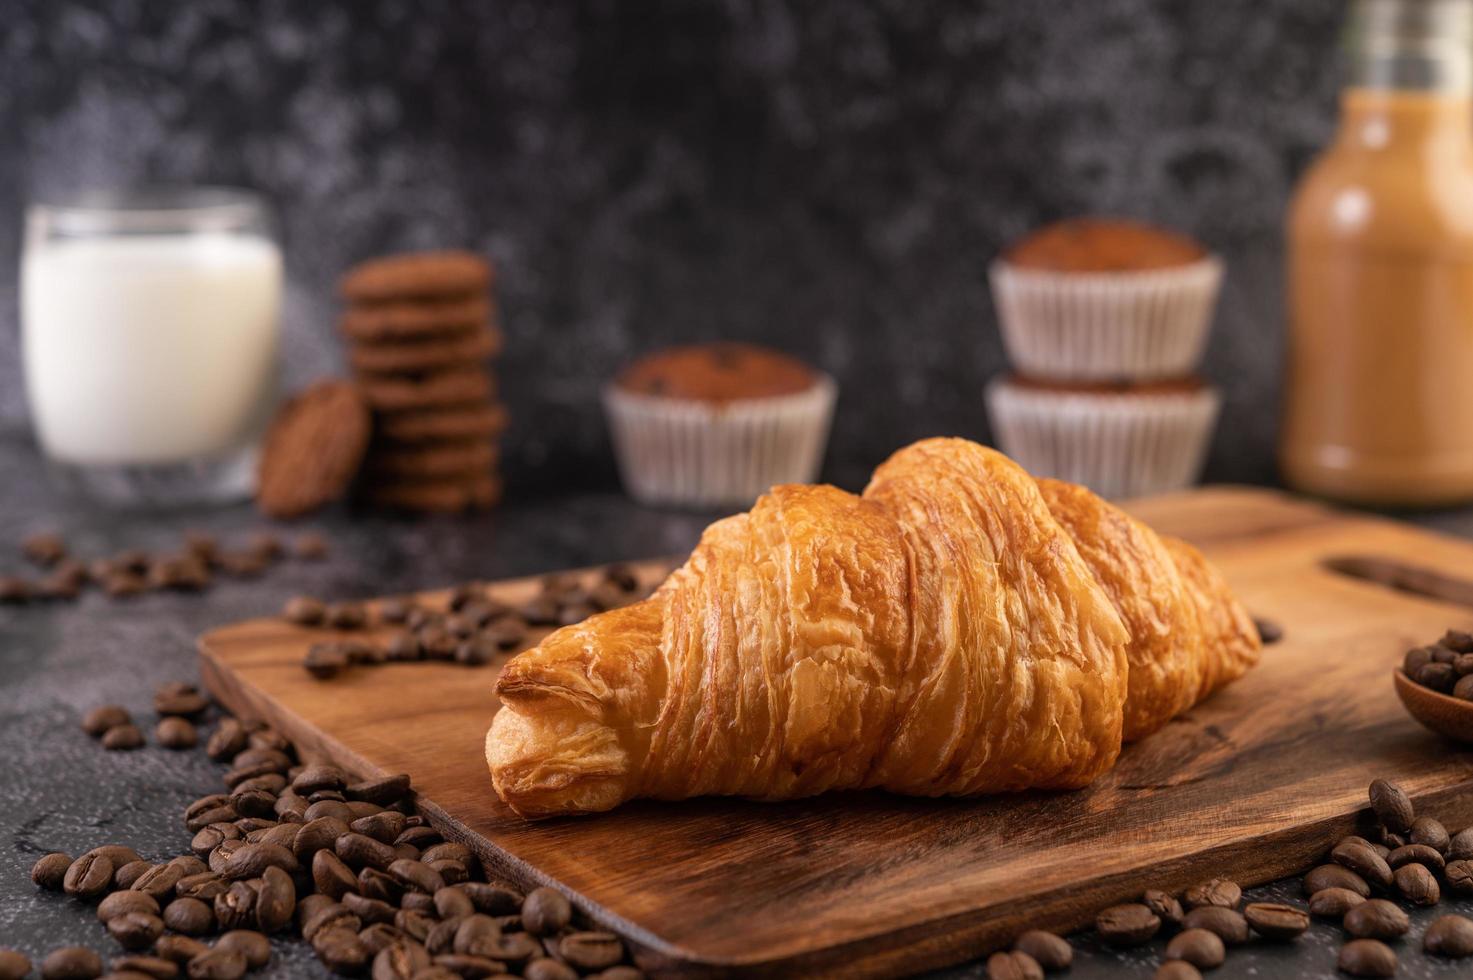 Croissant on a wooden board with coffee beansor. photo